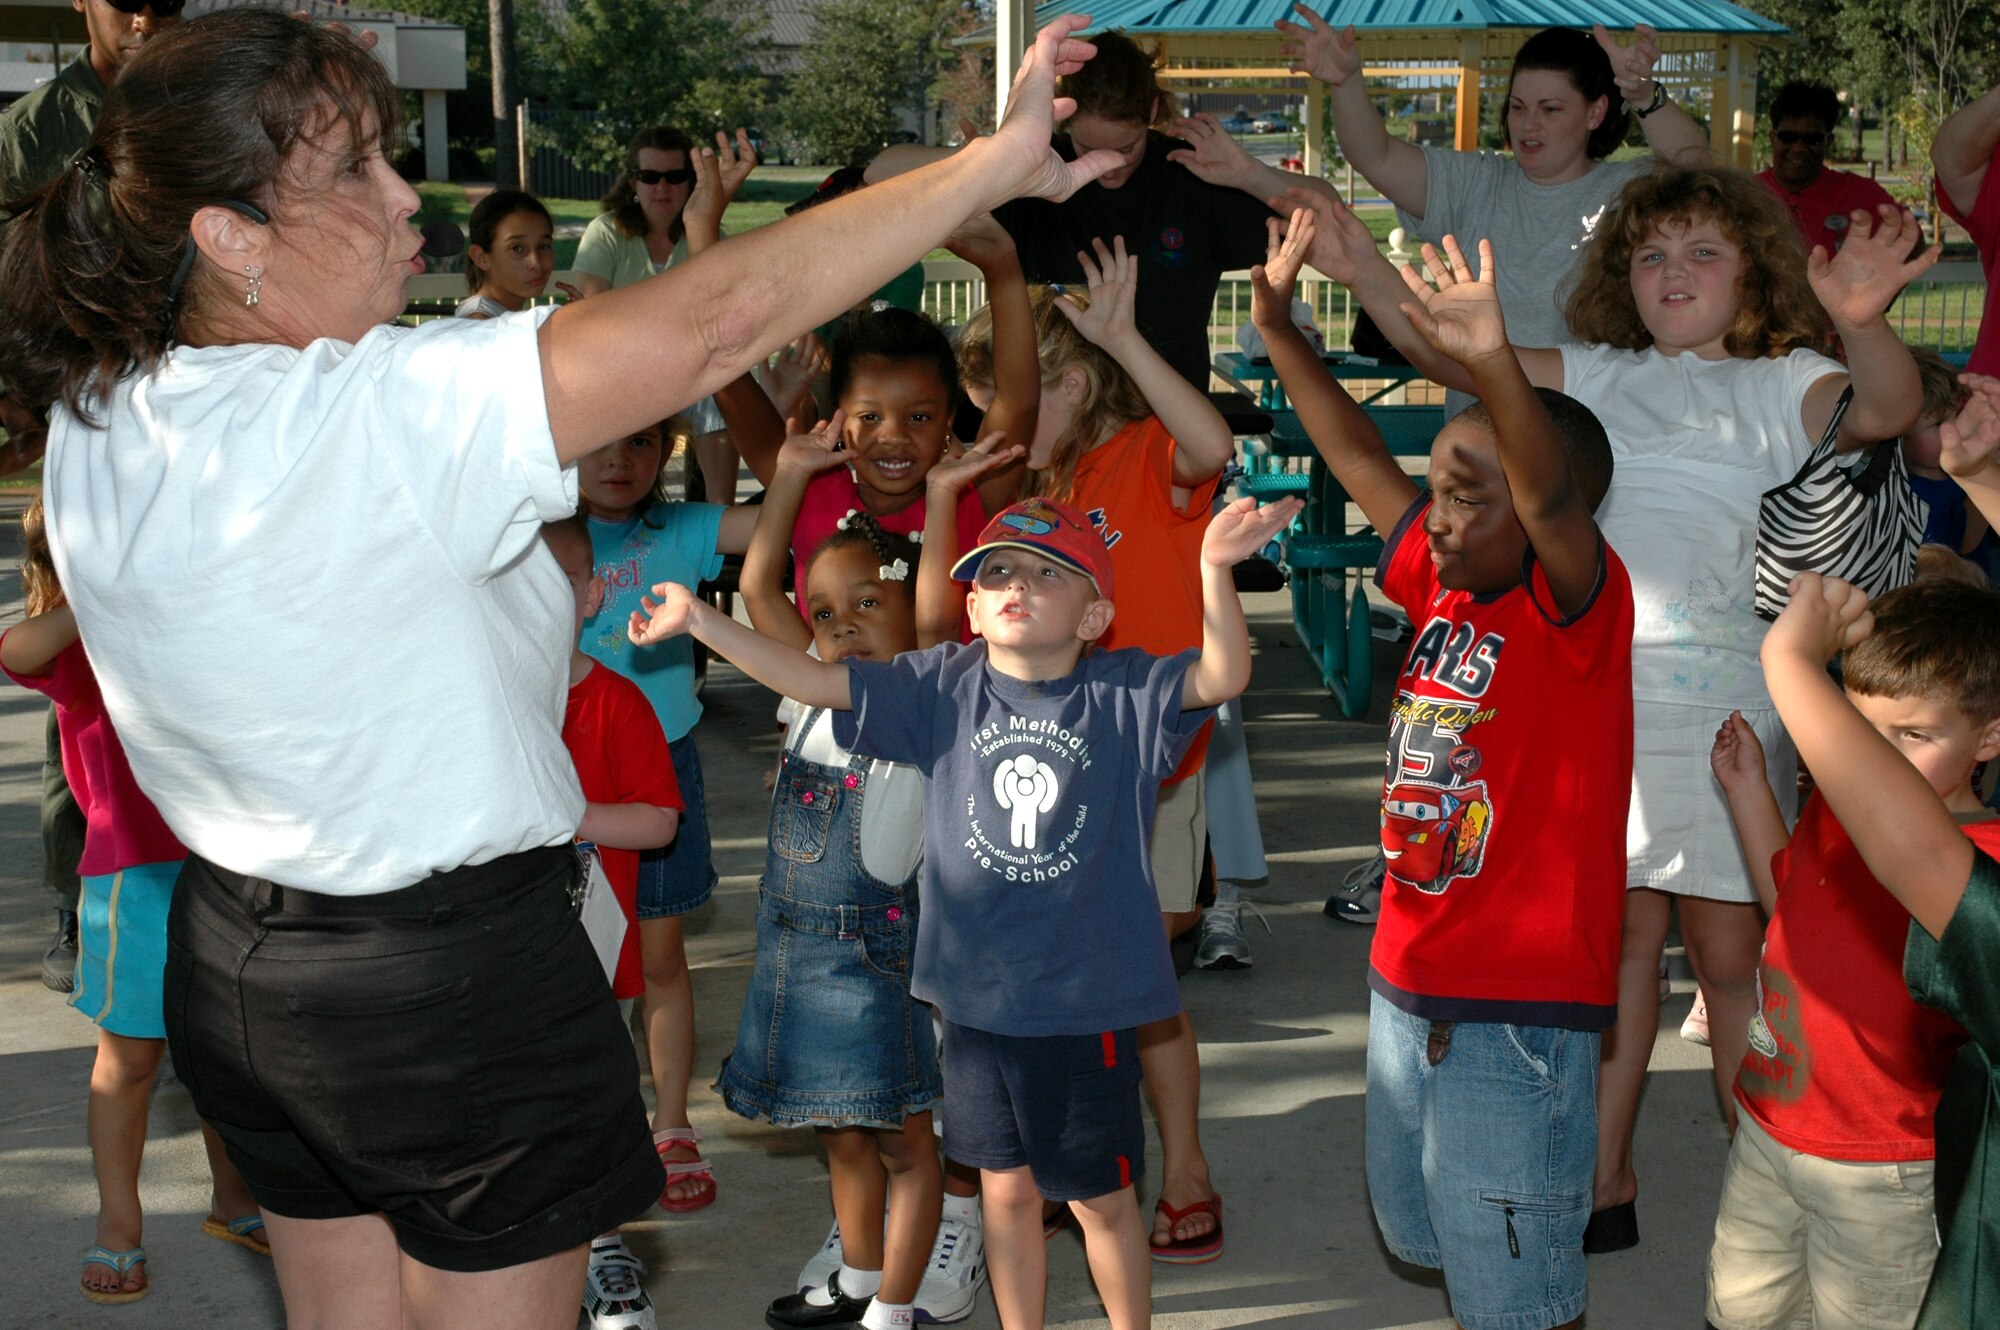 Maryann Harman, a music teacher from Pinellas County, leads a dance with Hurlburt Field children Sept. 15 at the pavilion in community park. She was here conducting training with the child development center. (U.S. Air Force Photograph by Master Sgt. Stuart Camp)